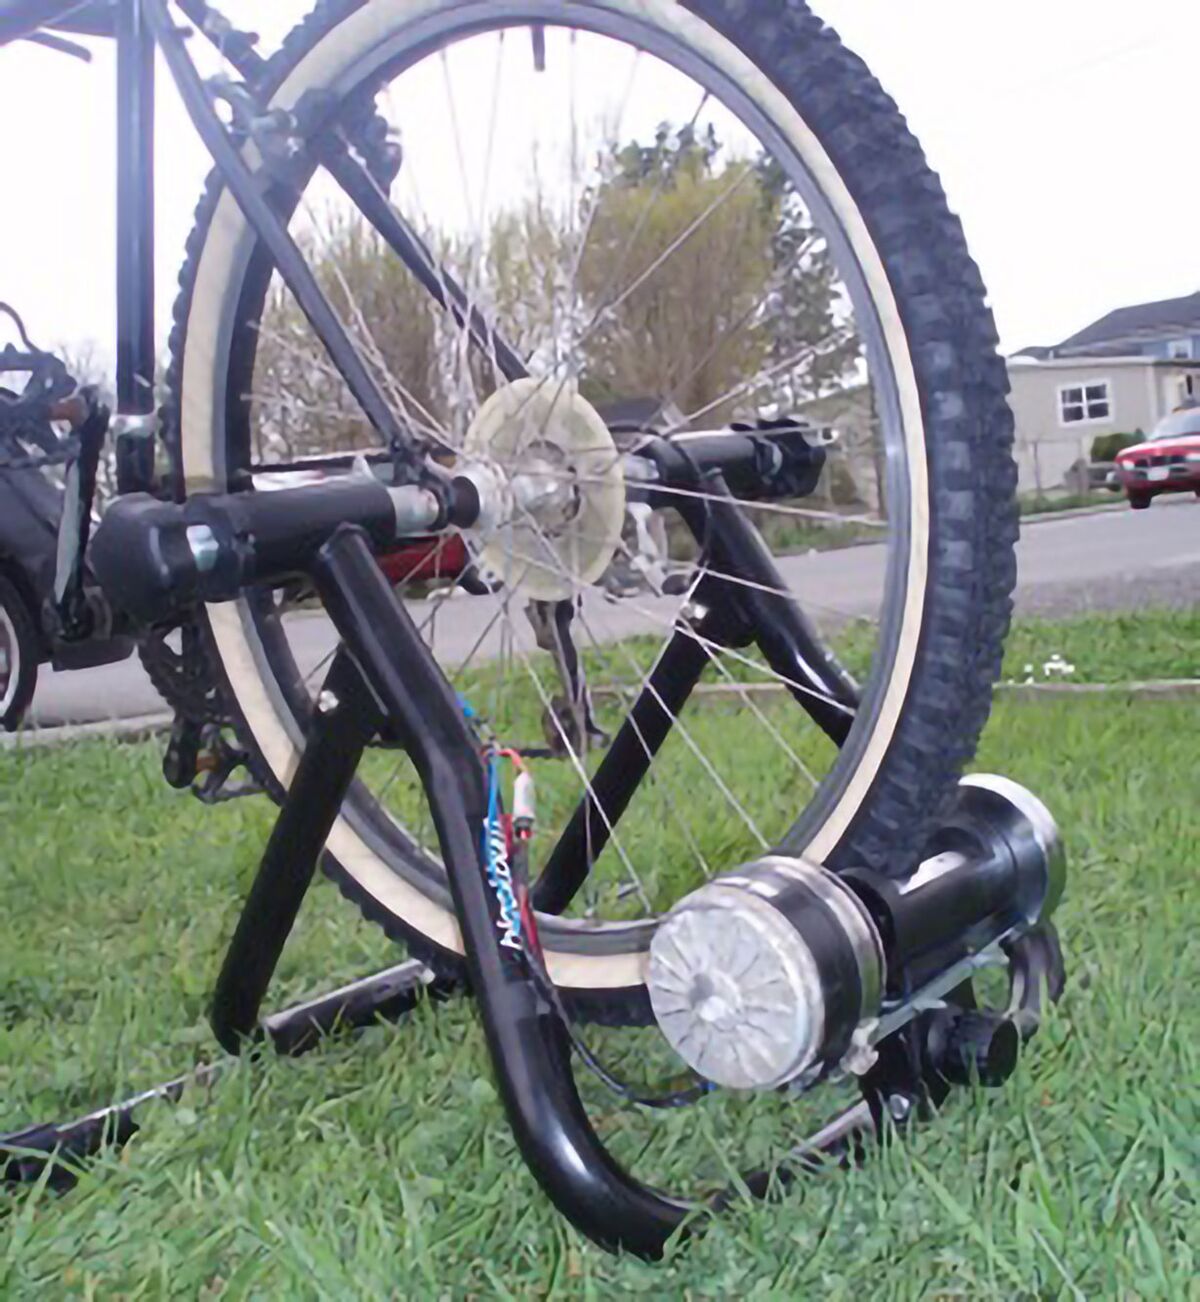 Pedal powered generator - Appropedia, the sustainability wiki